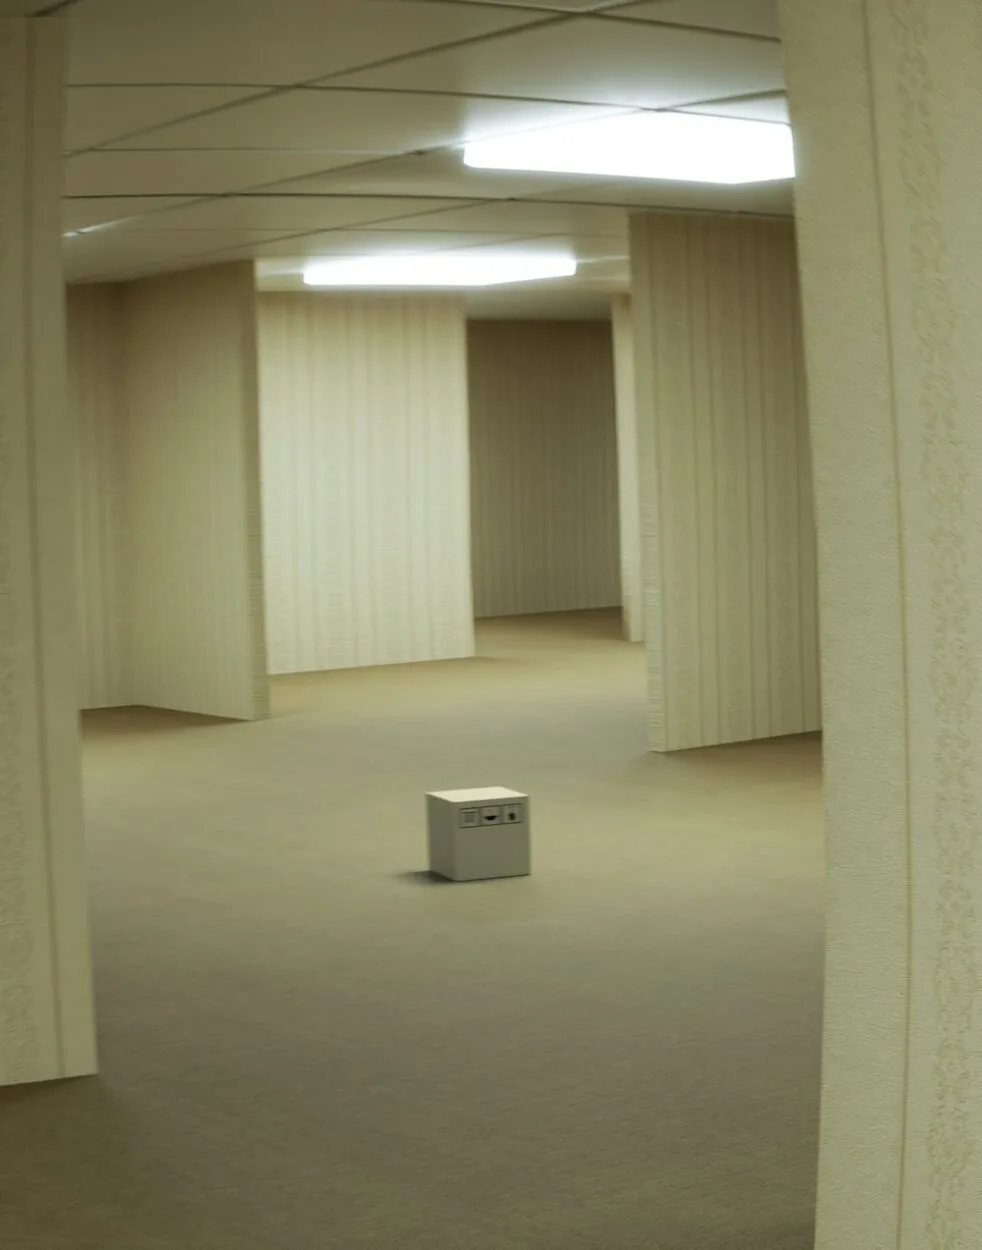 What Are Google Earth Backrooms? Inside The Creepy Empty Spaces